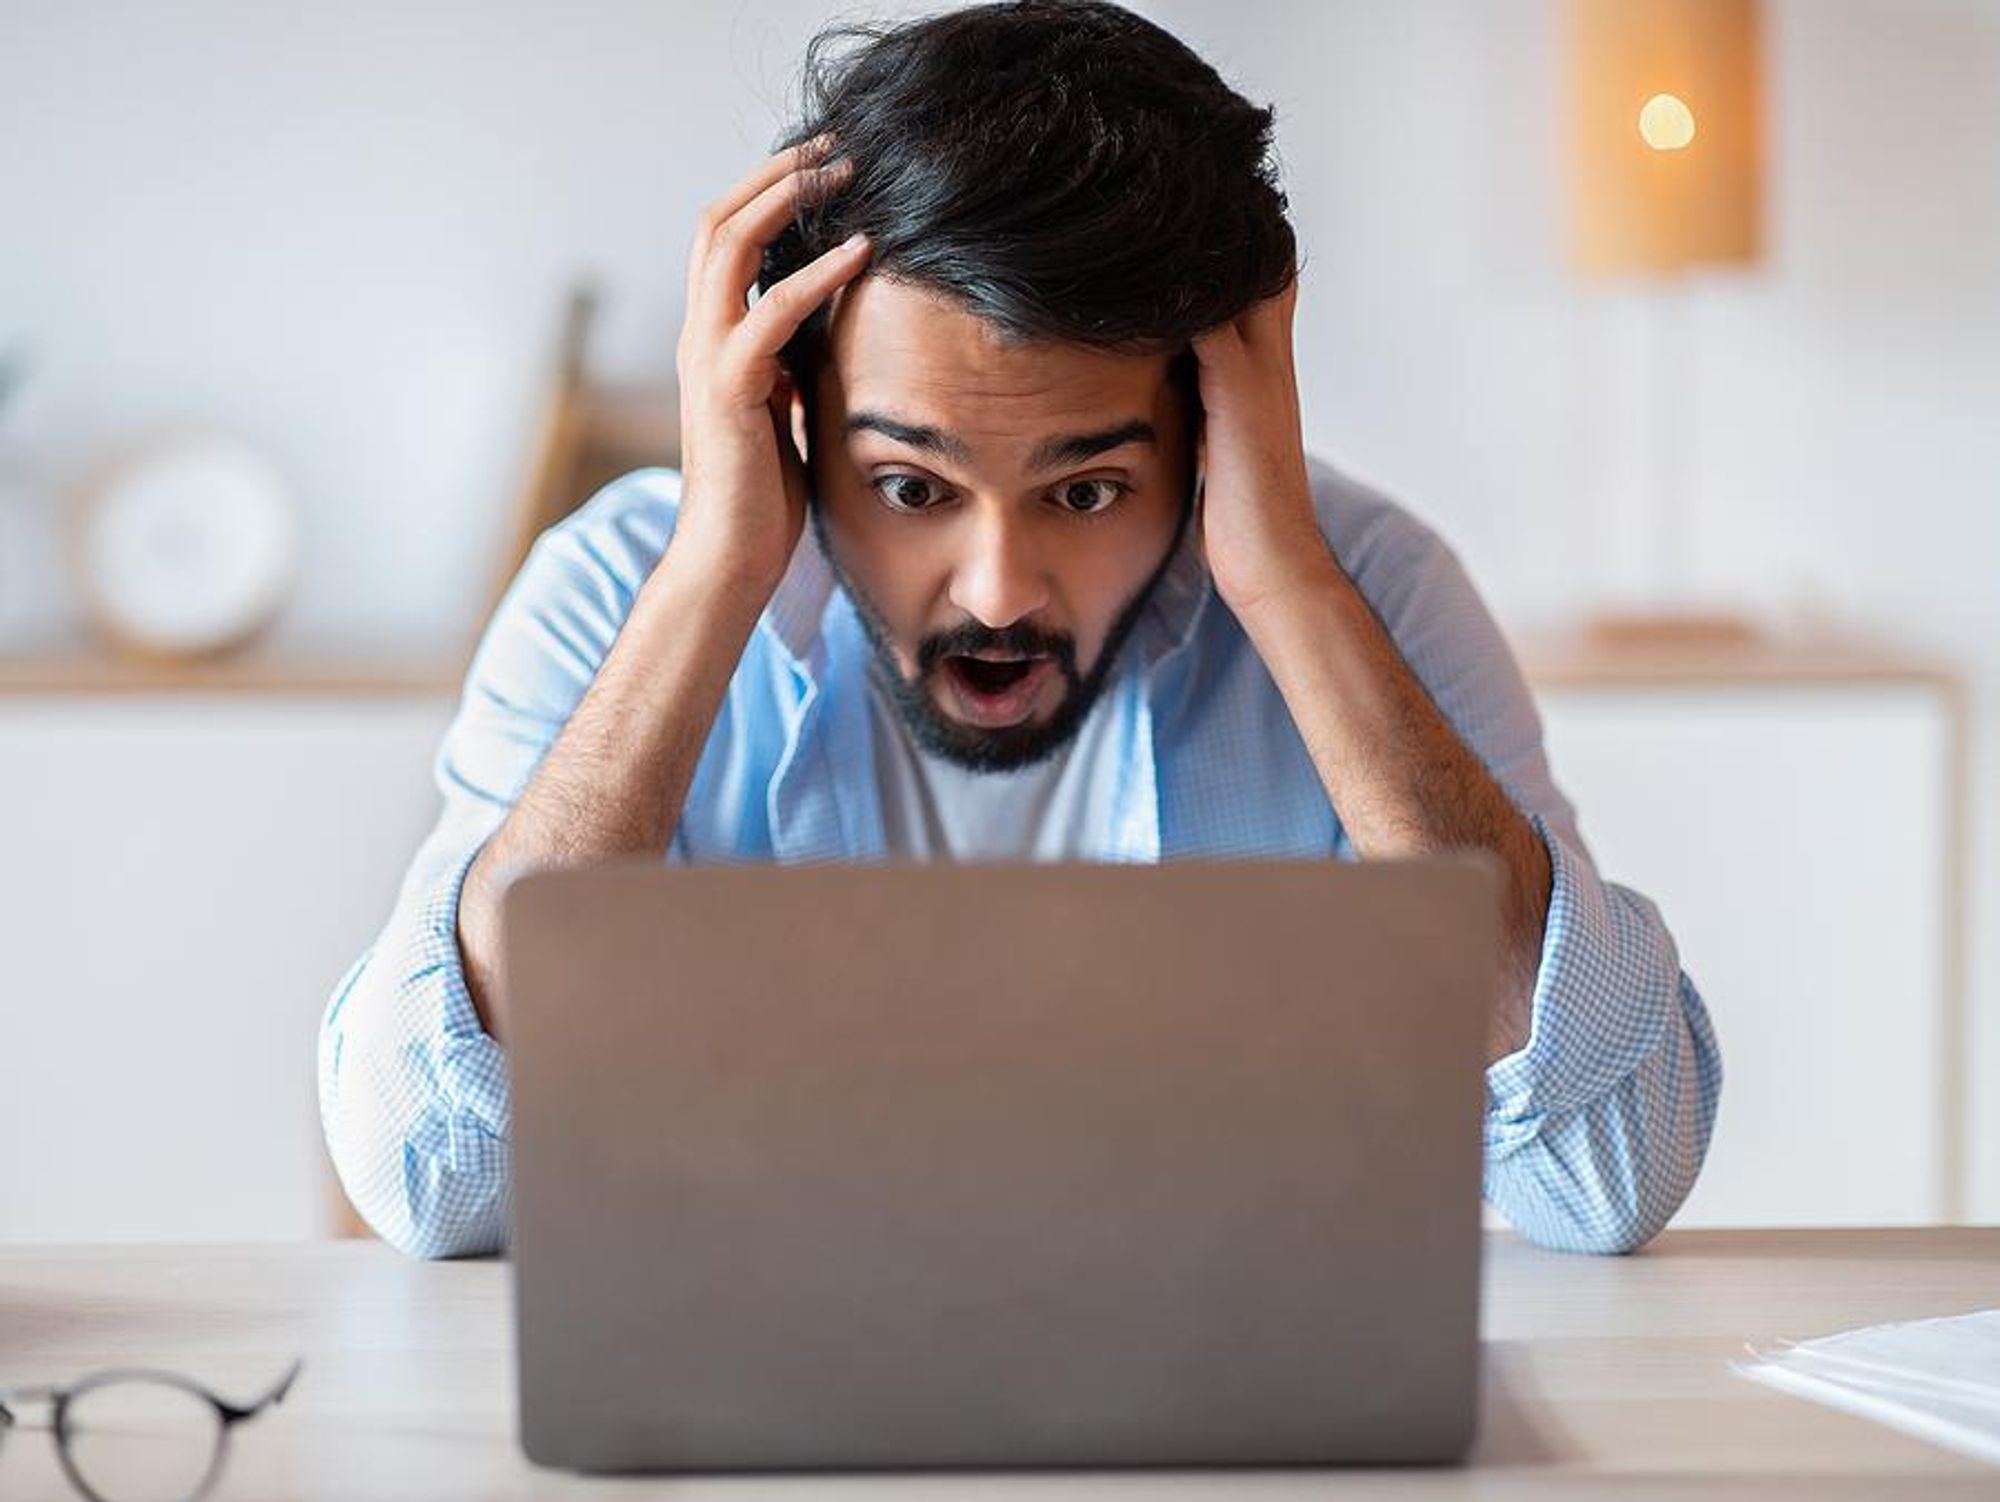 Frustrated man is miserable at work